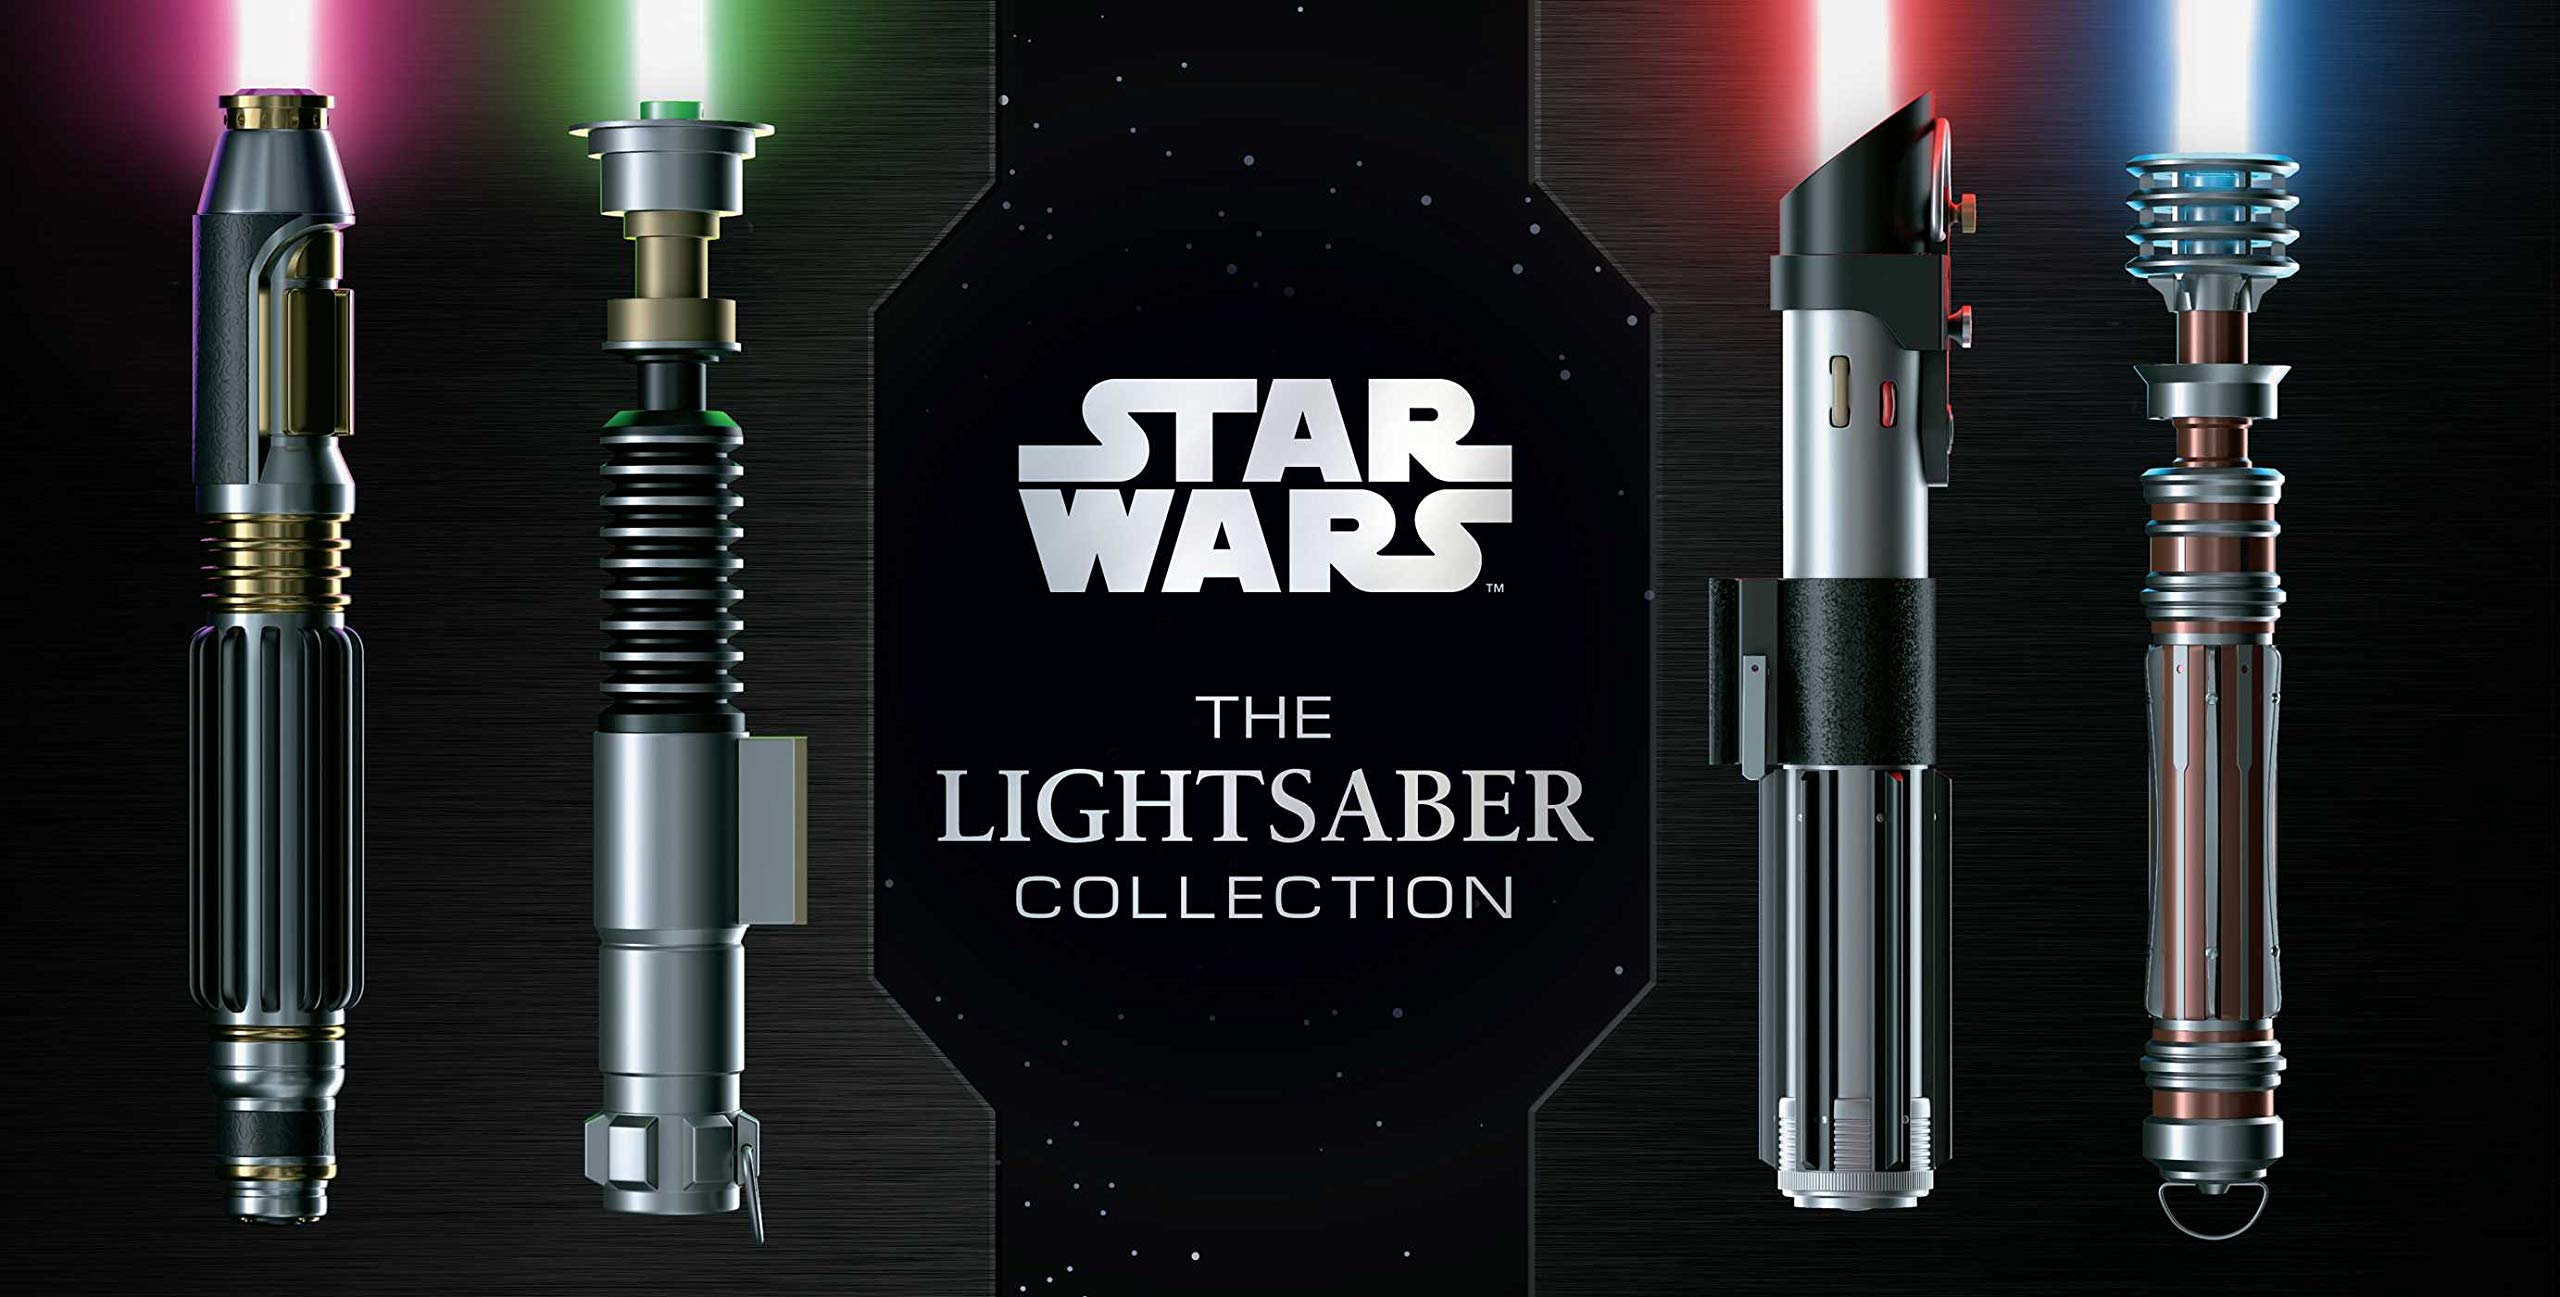 Star Wars: The Lightsaber Collection: Lightsabers from the Skywalker Saga, The Clone Wars, Star Wars Rebels and more. (Star Wars gift, Lightsaber book): Wallace, Daniel, Liszko, Lukasz, Valle, Ryan